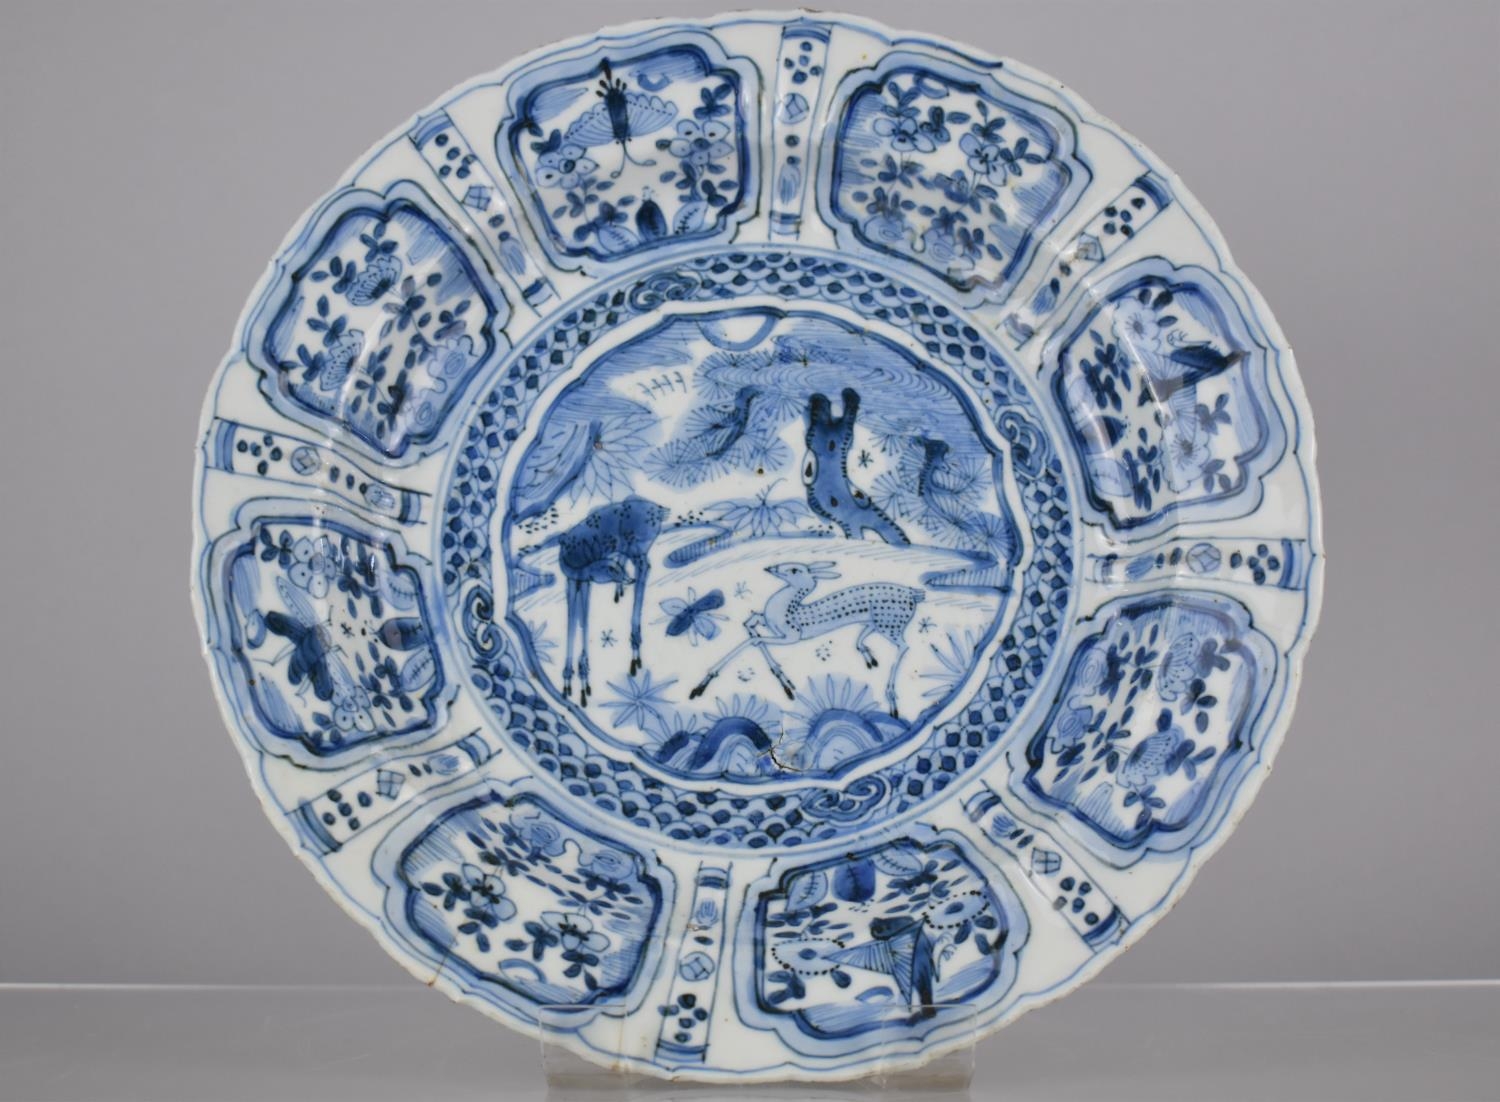 An Early Chinese Porcelain, Probably Kangxi Period (1662-1722) Blue and White Plate Decorated with - Image 2 of 4